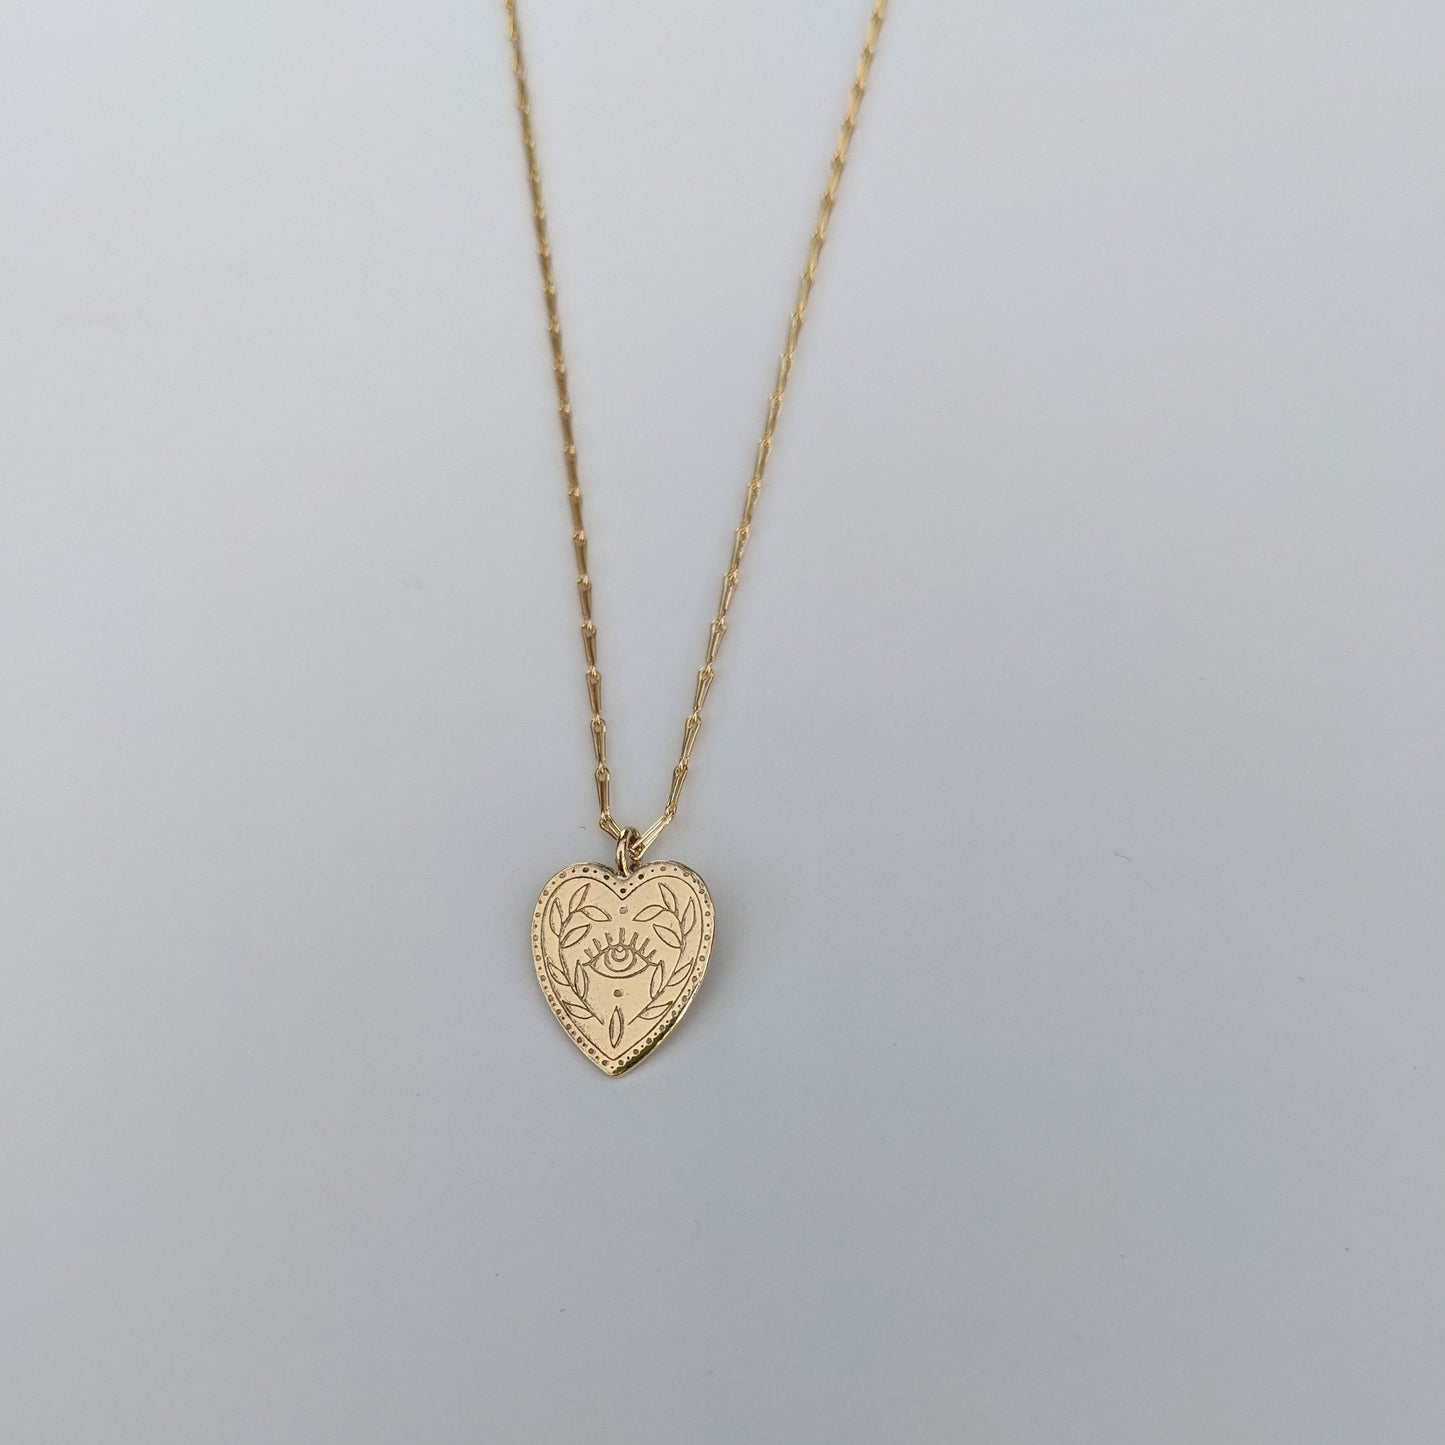 Engraved Heart Necklaces